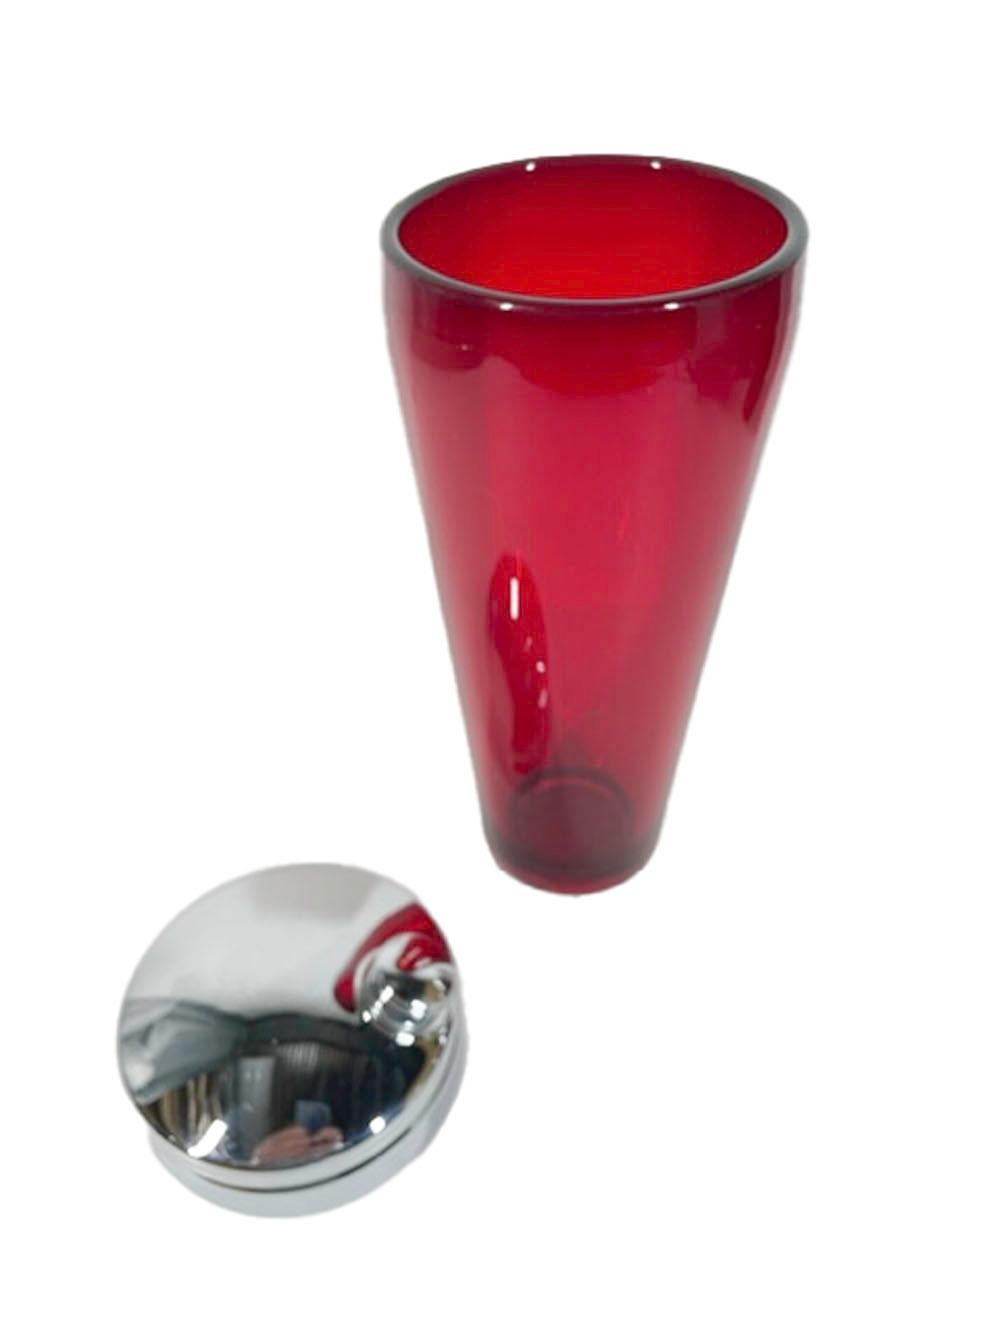 American Art Deco Ruby Red Cocktail Shaker with Chrome Lid